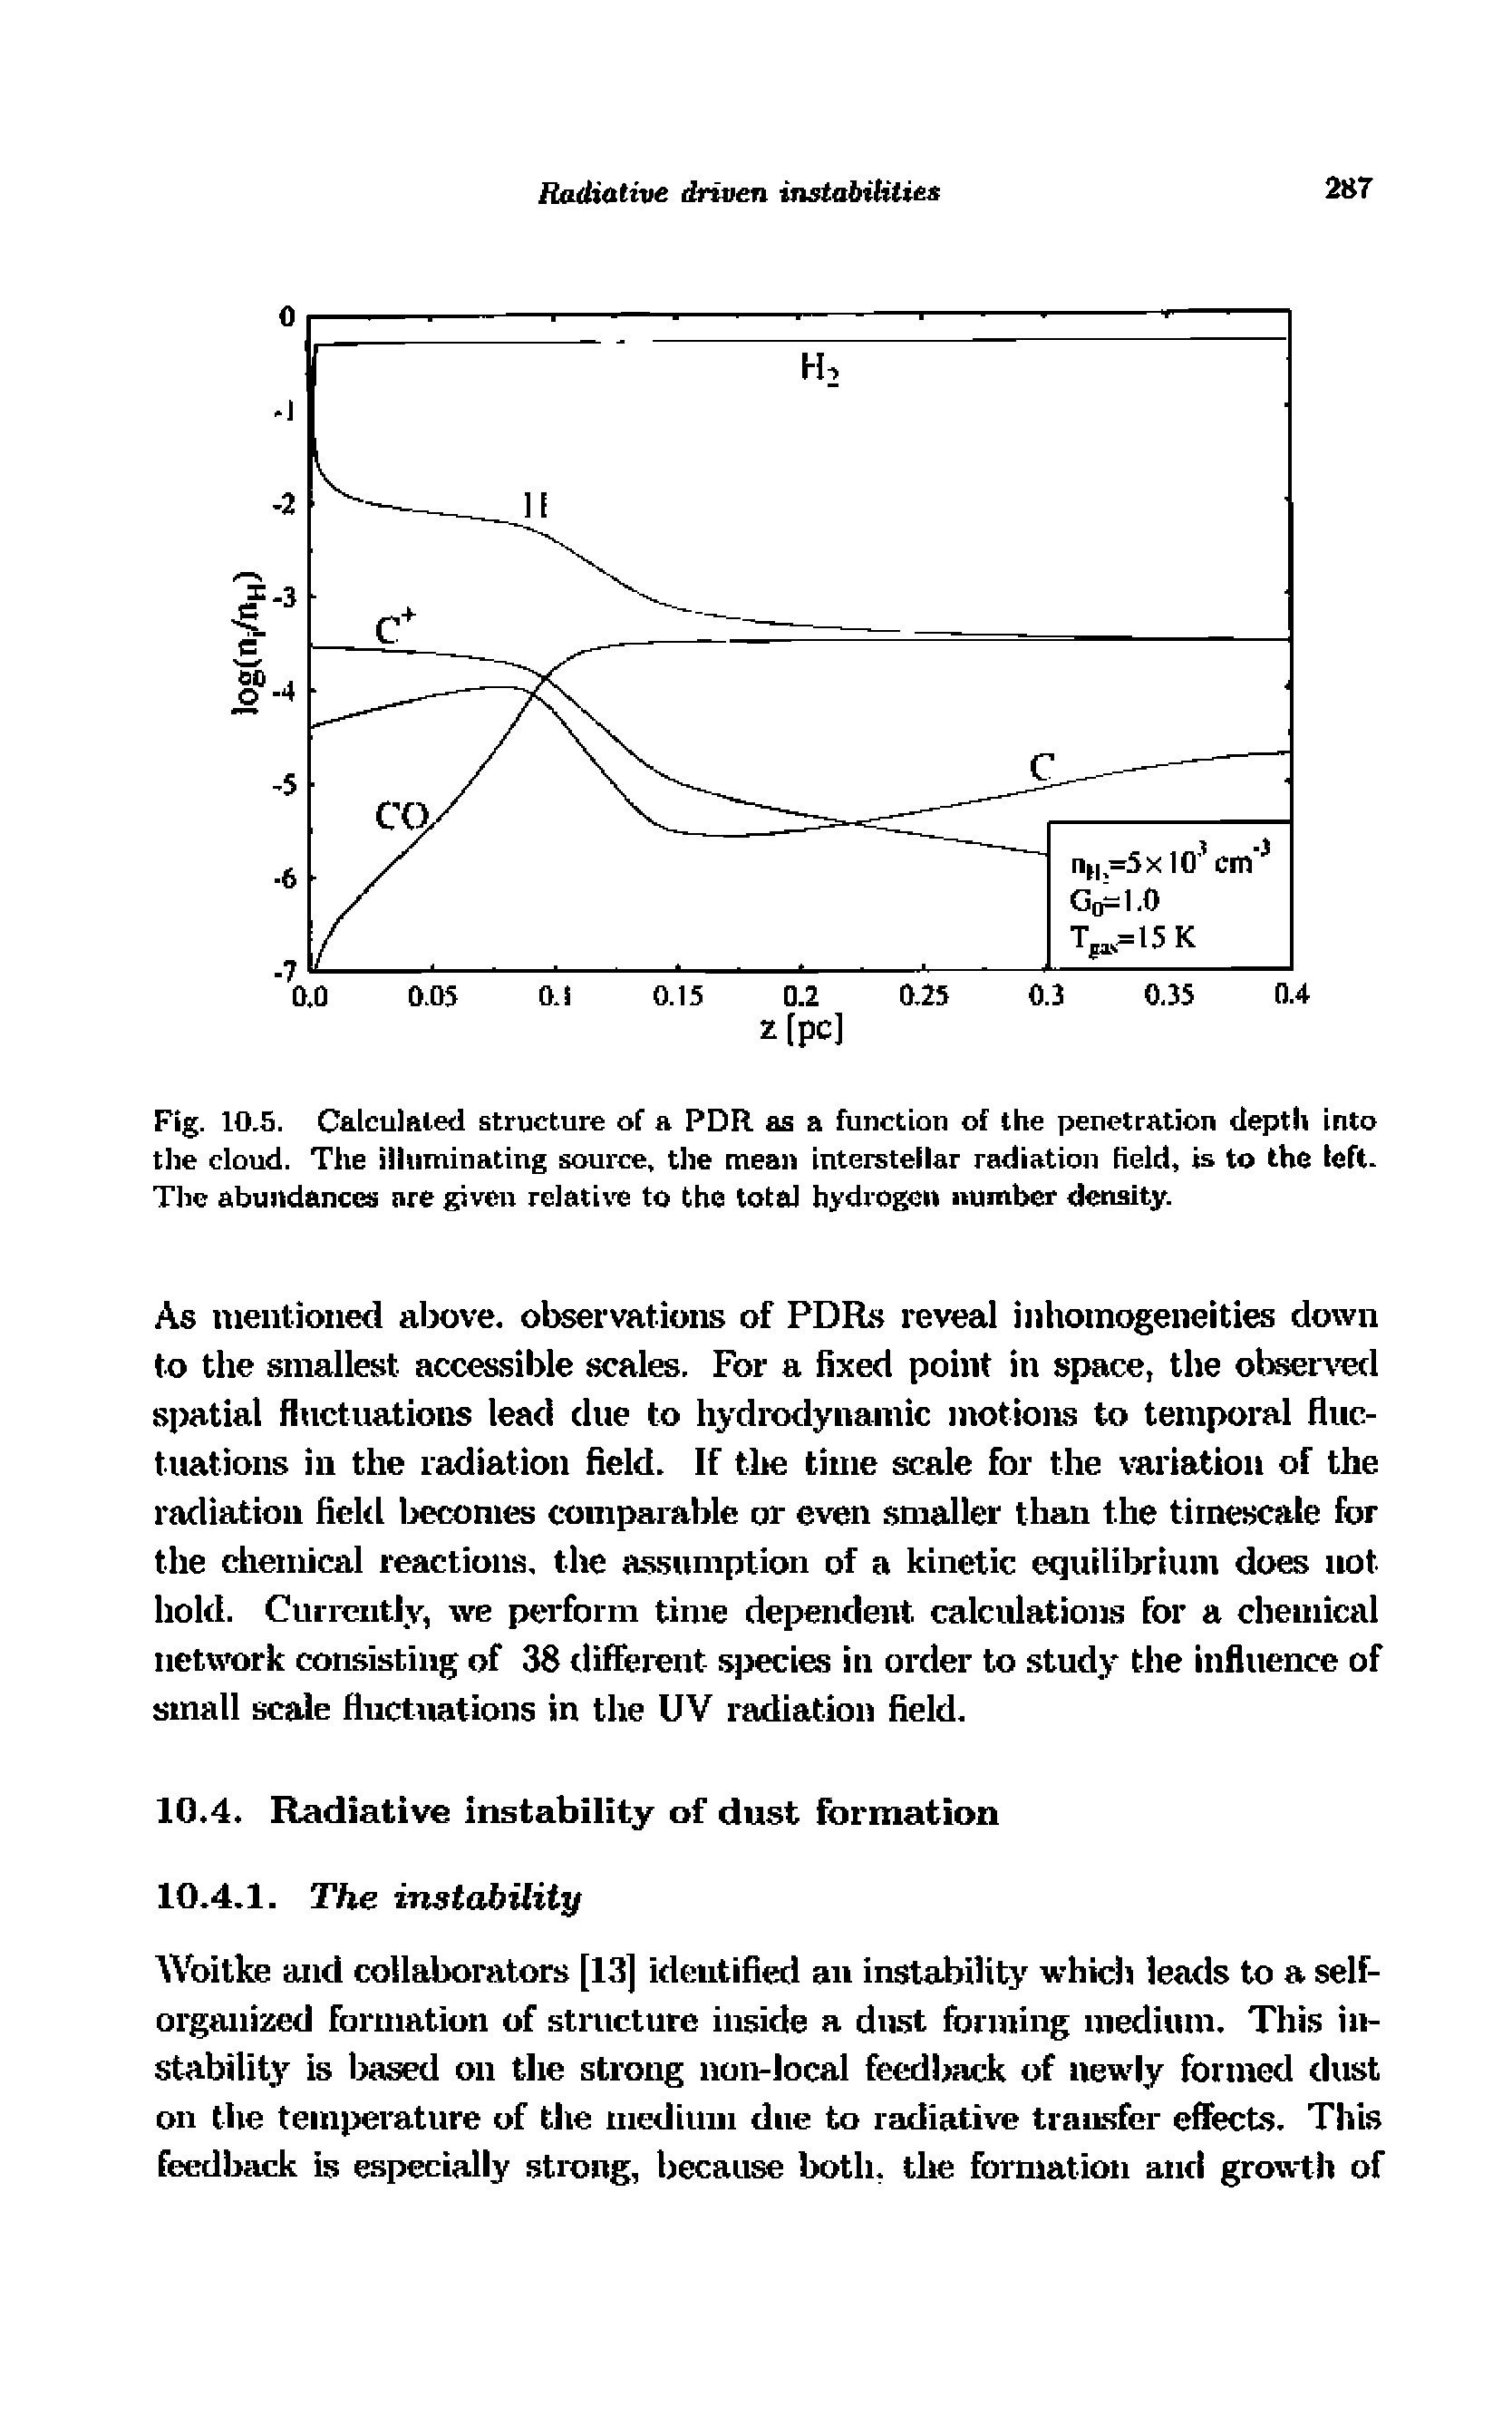 Fig. 10.5. Calculaled structure of a PDR as a function of the penetration depth into tire cloud. The illuminating source, the mean interstellar radiation field, is to the left. The abundances are given relatit to the total hydrogen number density.